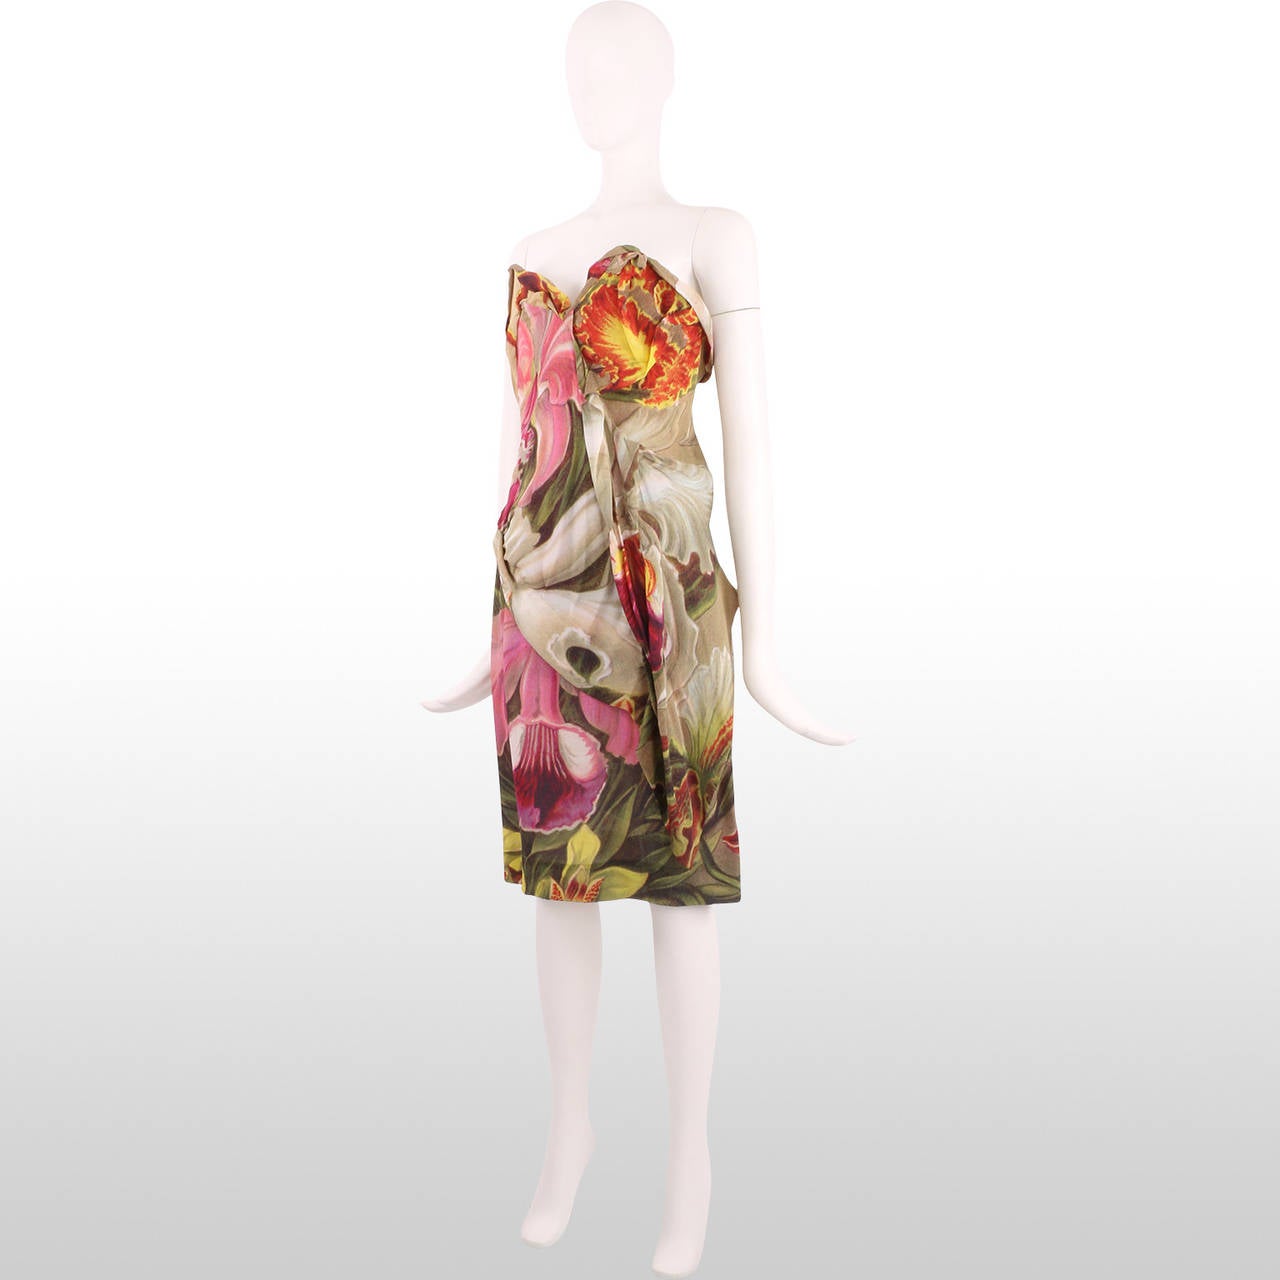 Women's Vivienne Westwood Red Label Boned Strapless Bodice Floral Printed Dress